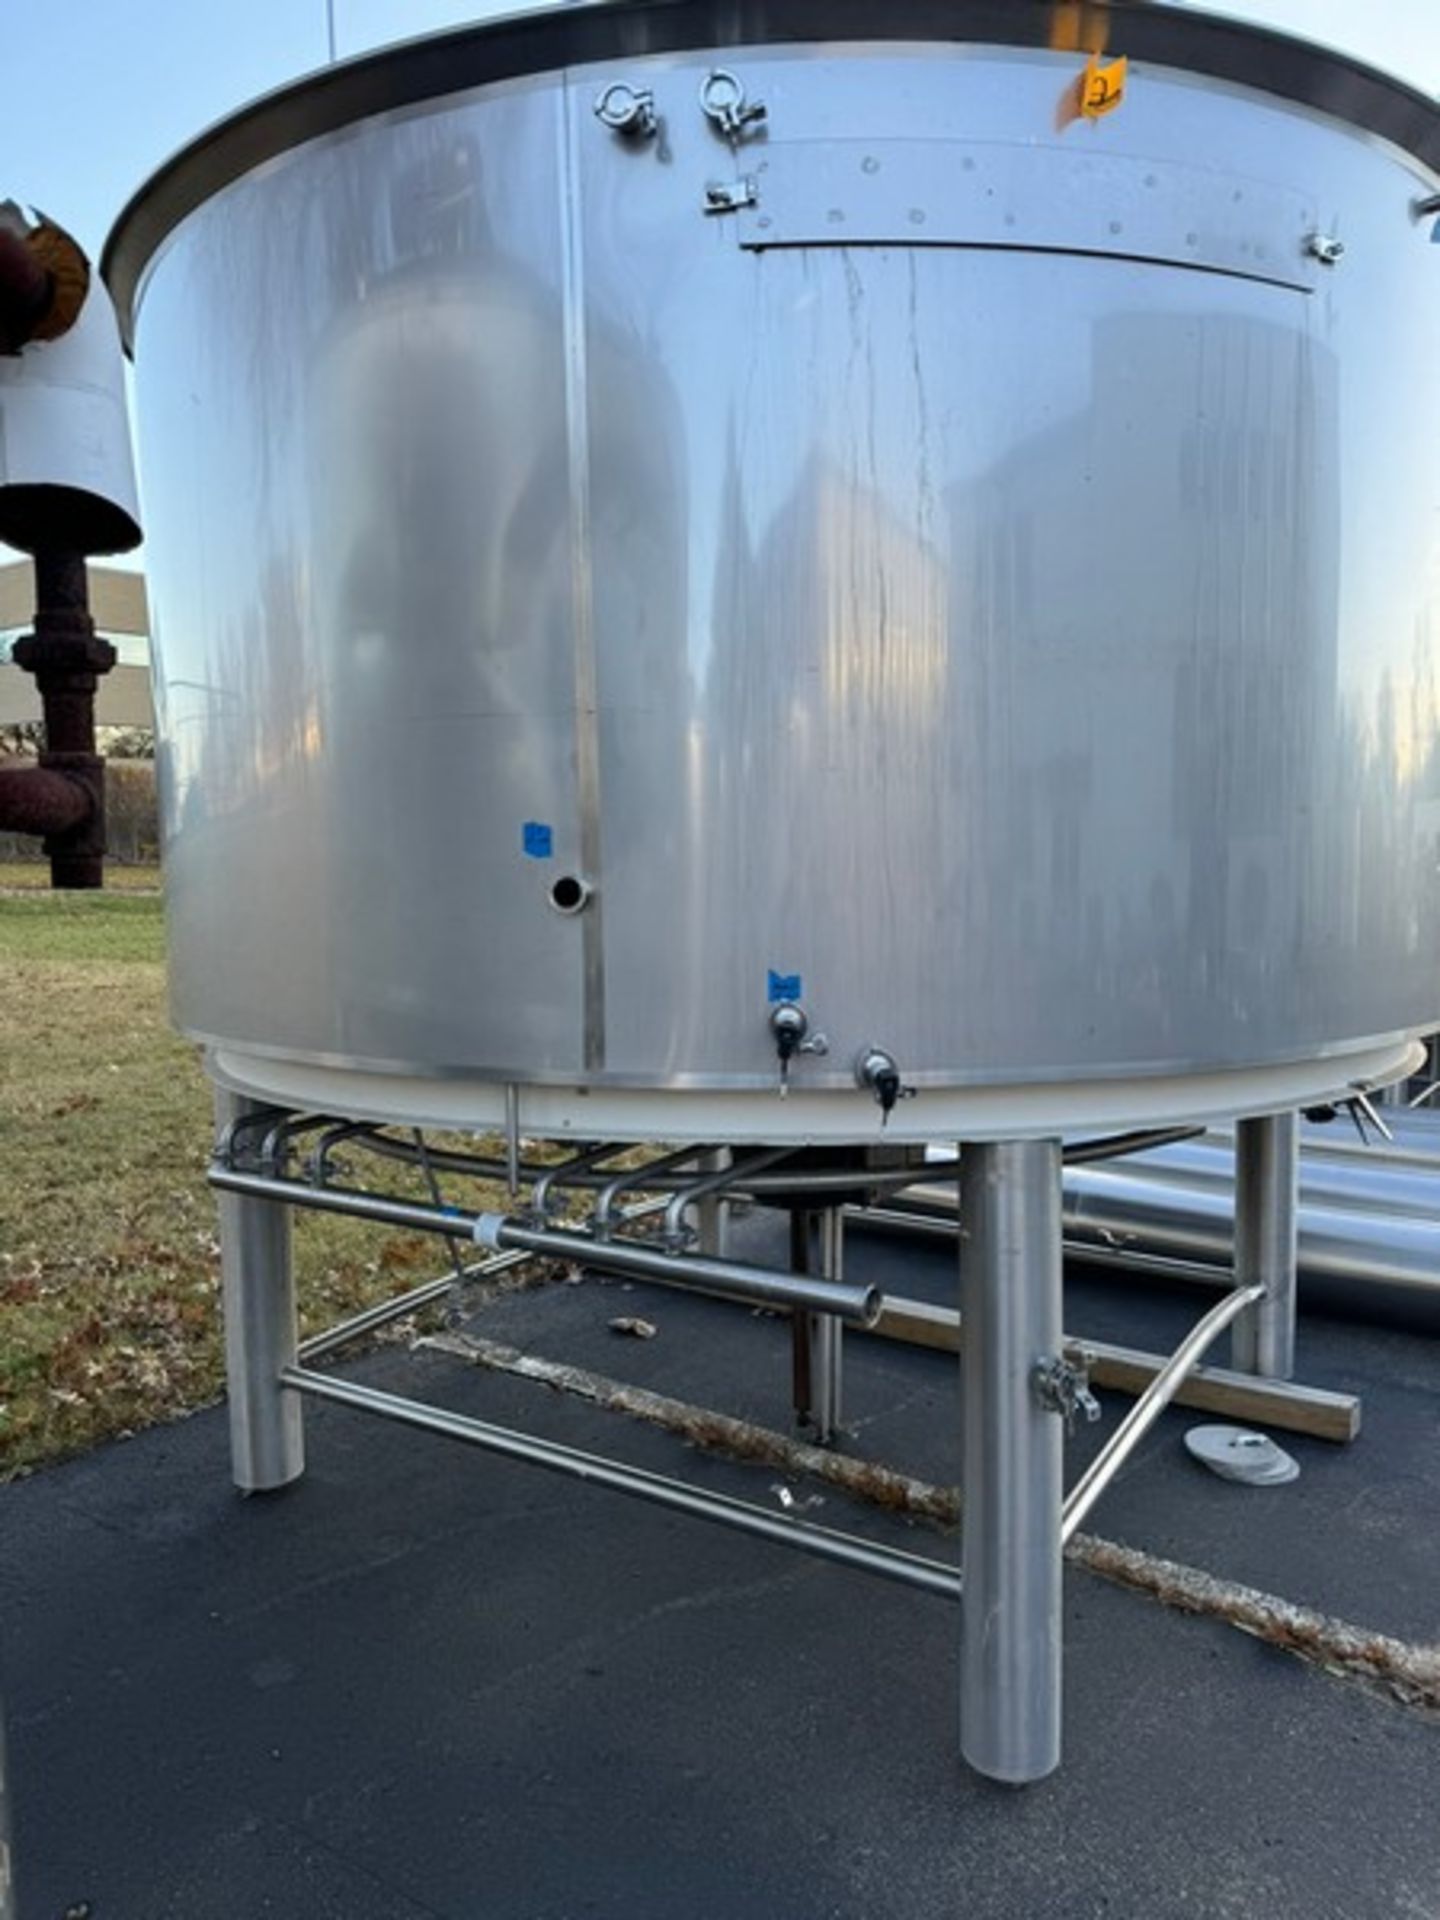 2012 Specific Mechanical Systems 45 BBL Capacity S/S Lauter Tun Tank, S/N RMP-136-12, with Legs, - Image 8 of 16